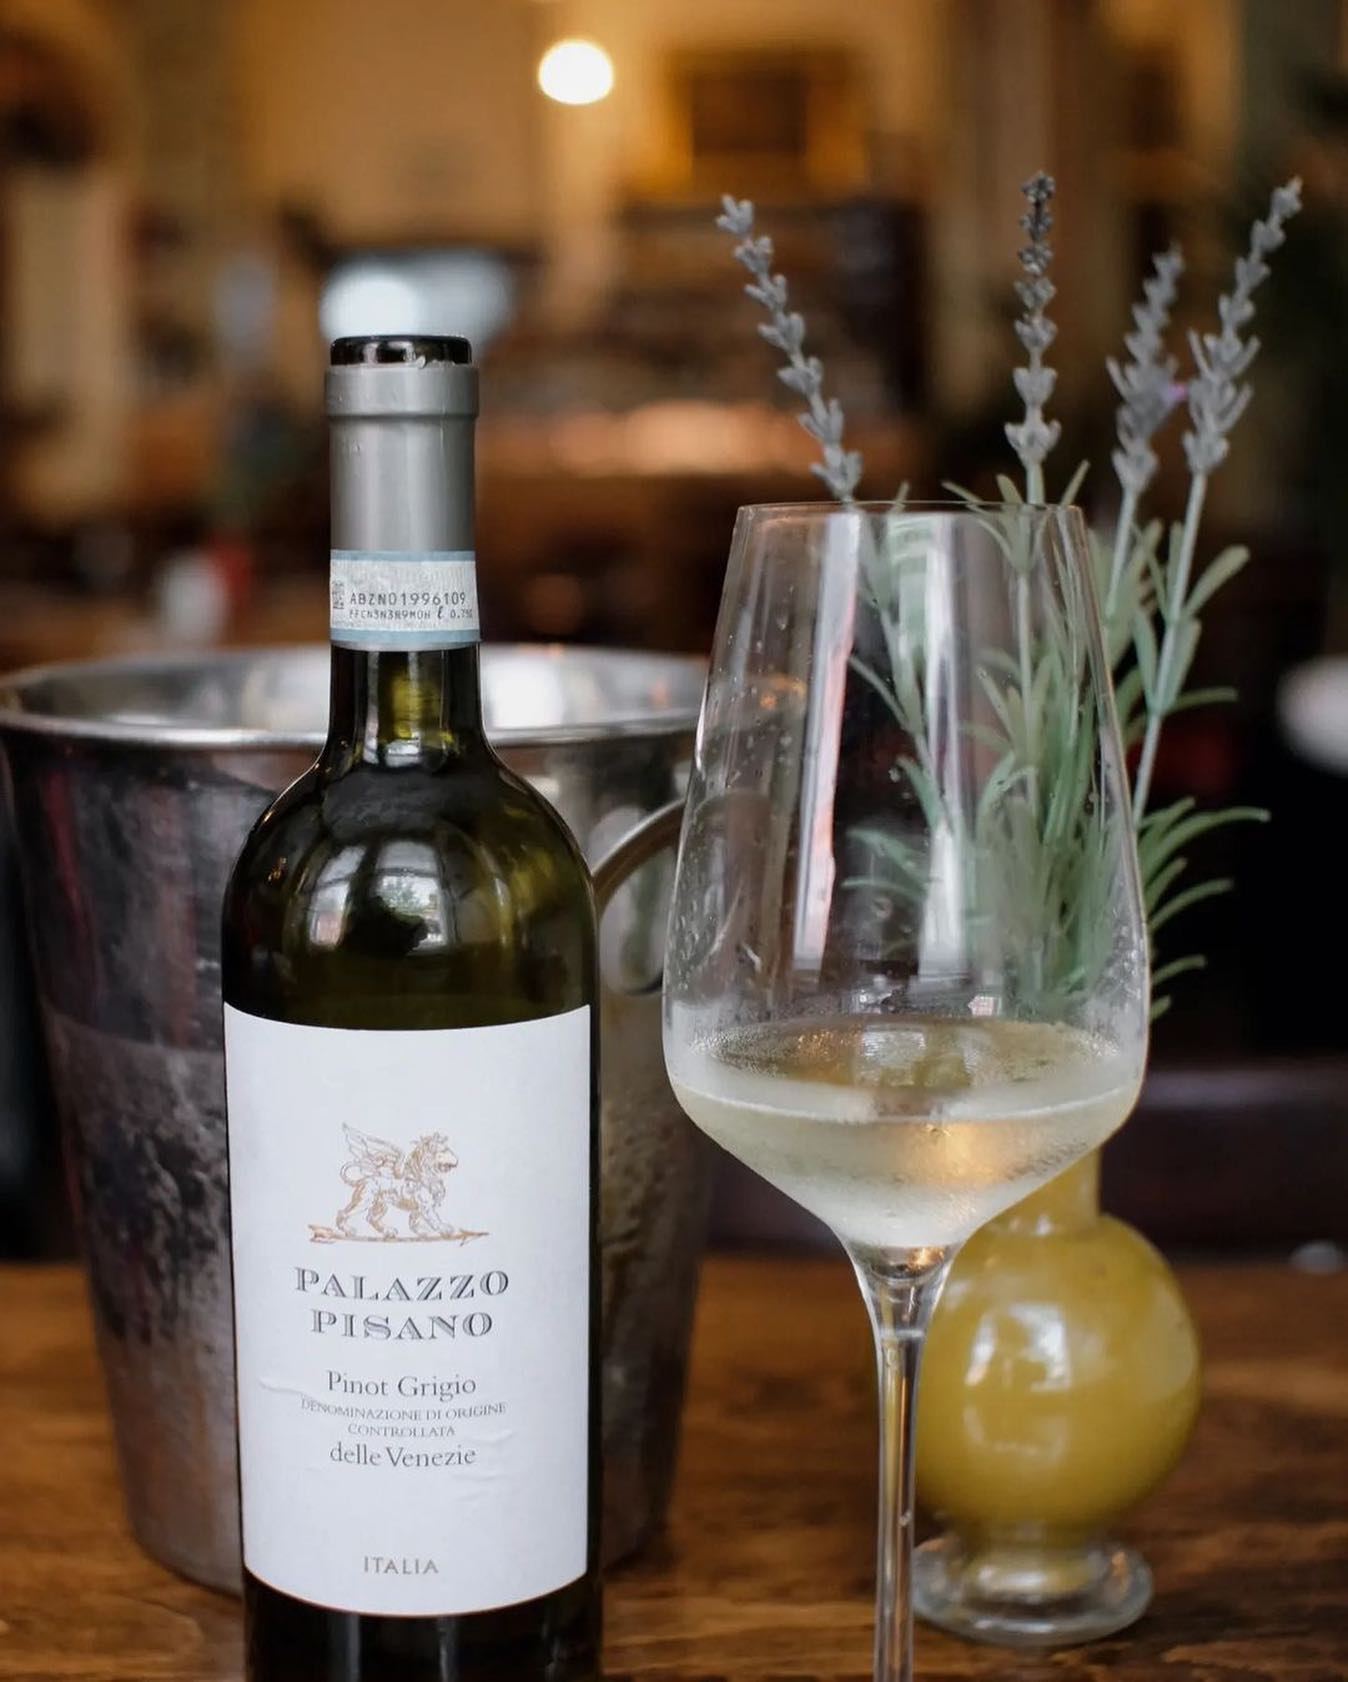 Happy weekend wine lovers 🤩🍷🍷Come and enjoy a glass or two and celebrate the weekend 😉👌

#wine #winelover #birmingham #stpaulssquare #jq #jewelleryquarter #restaurant #hiddengem #brumfood